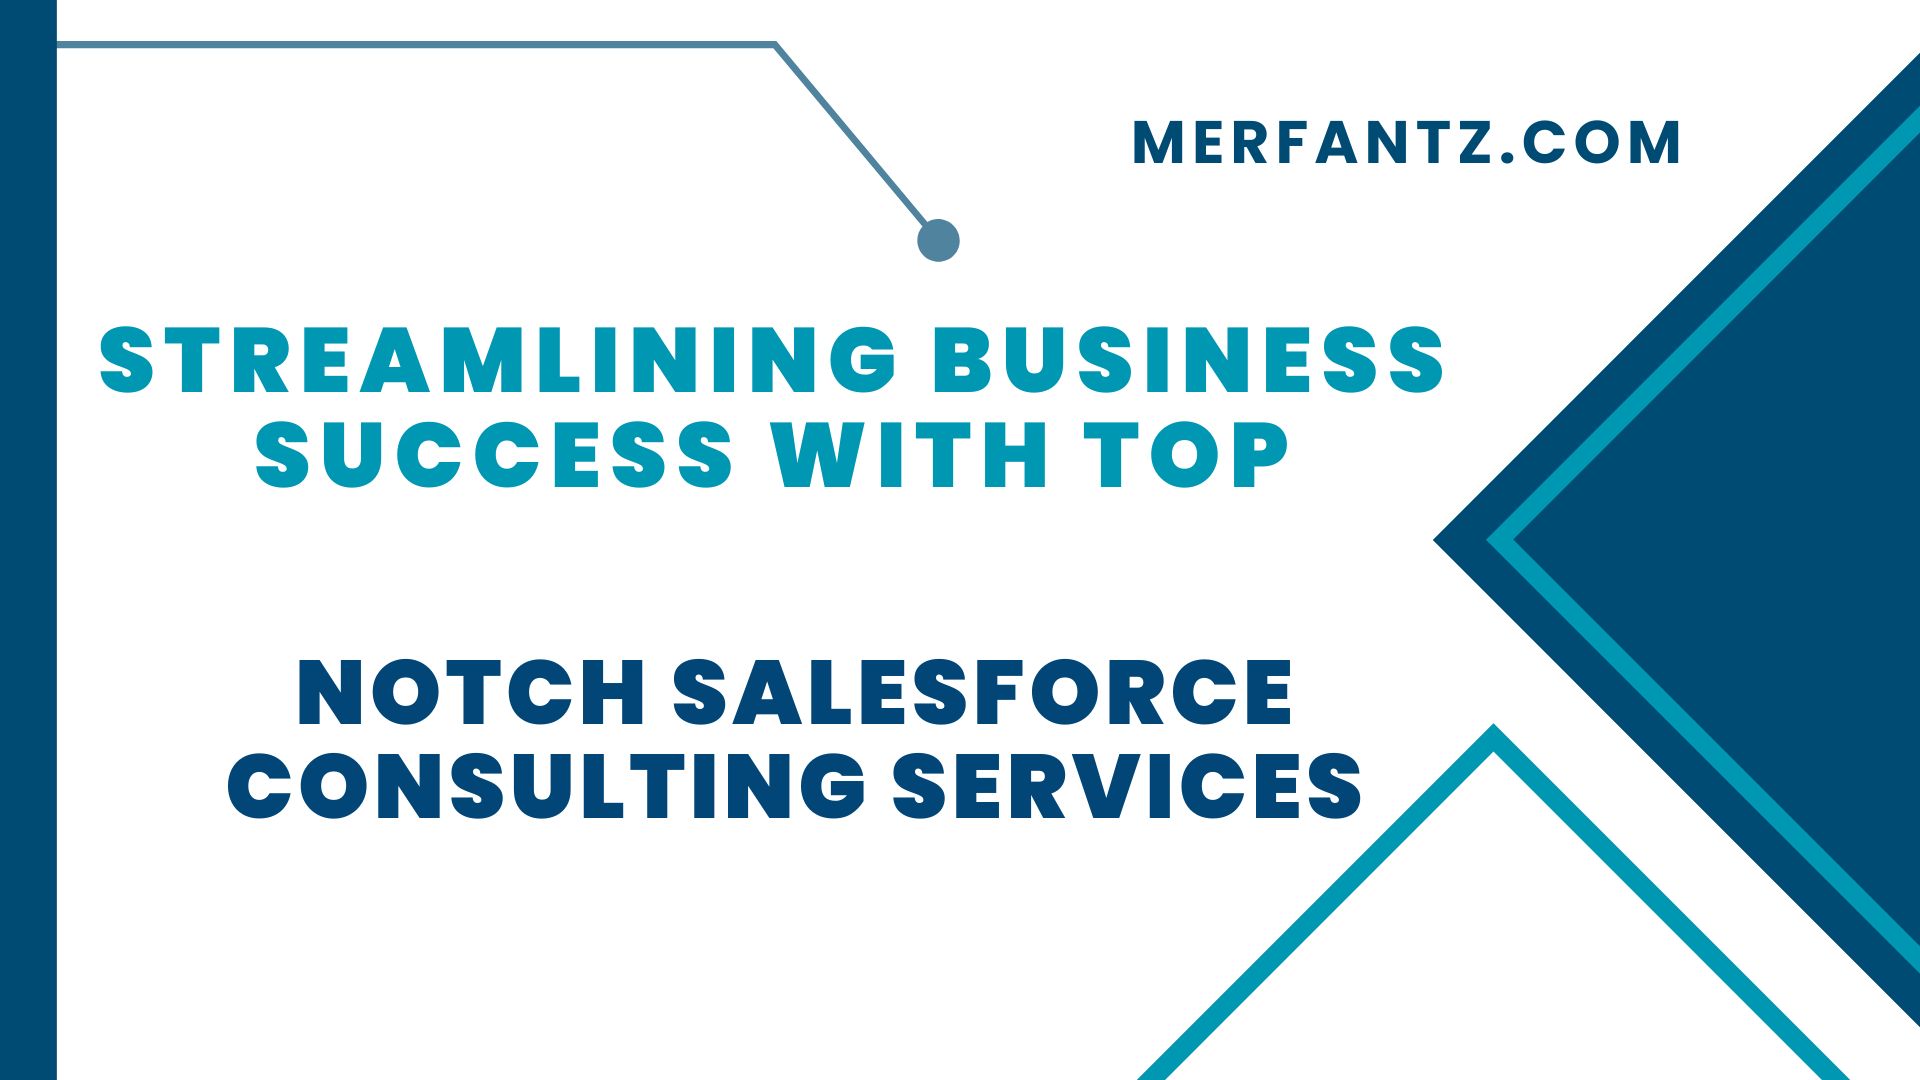 Streamlining Business Success with Top-Notch Salesforce Consulting Services